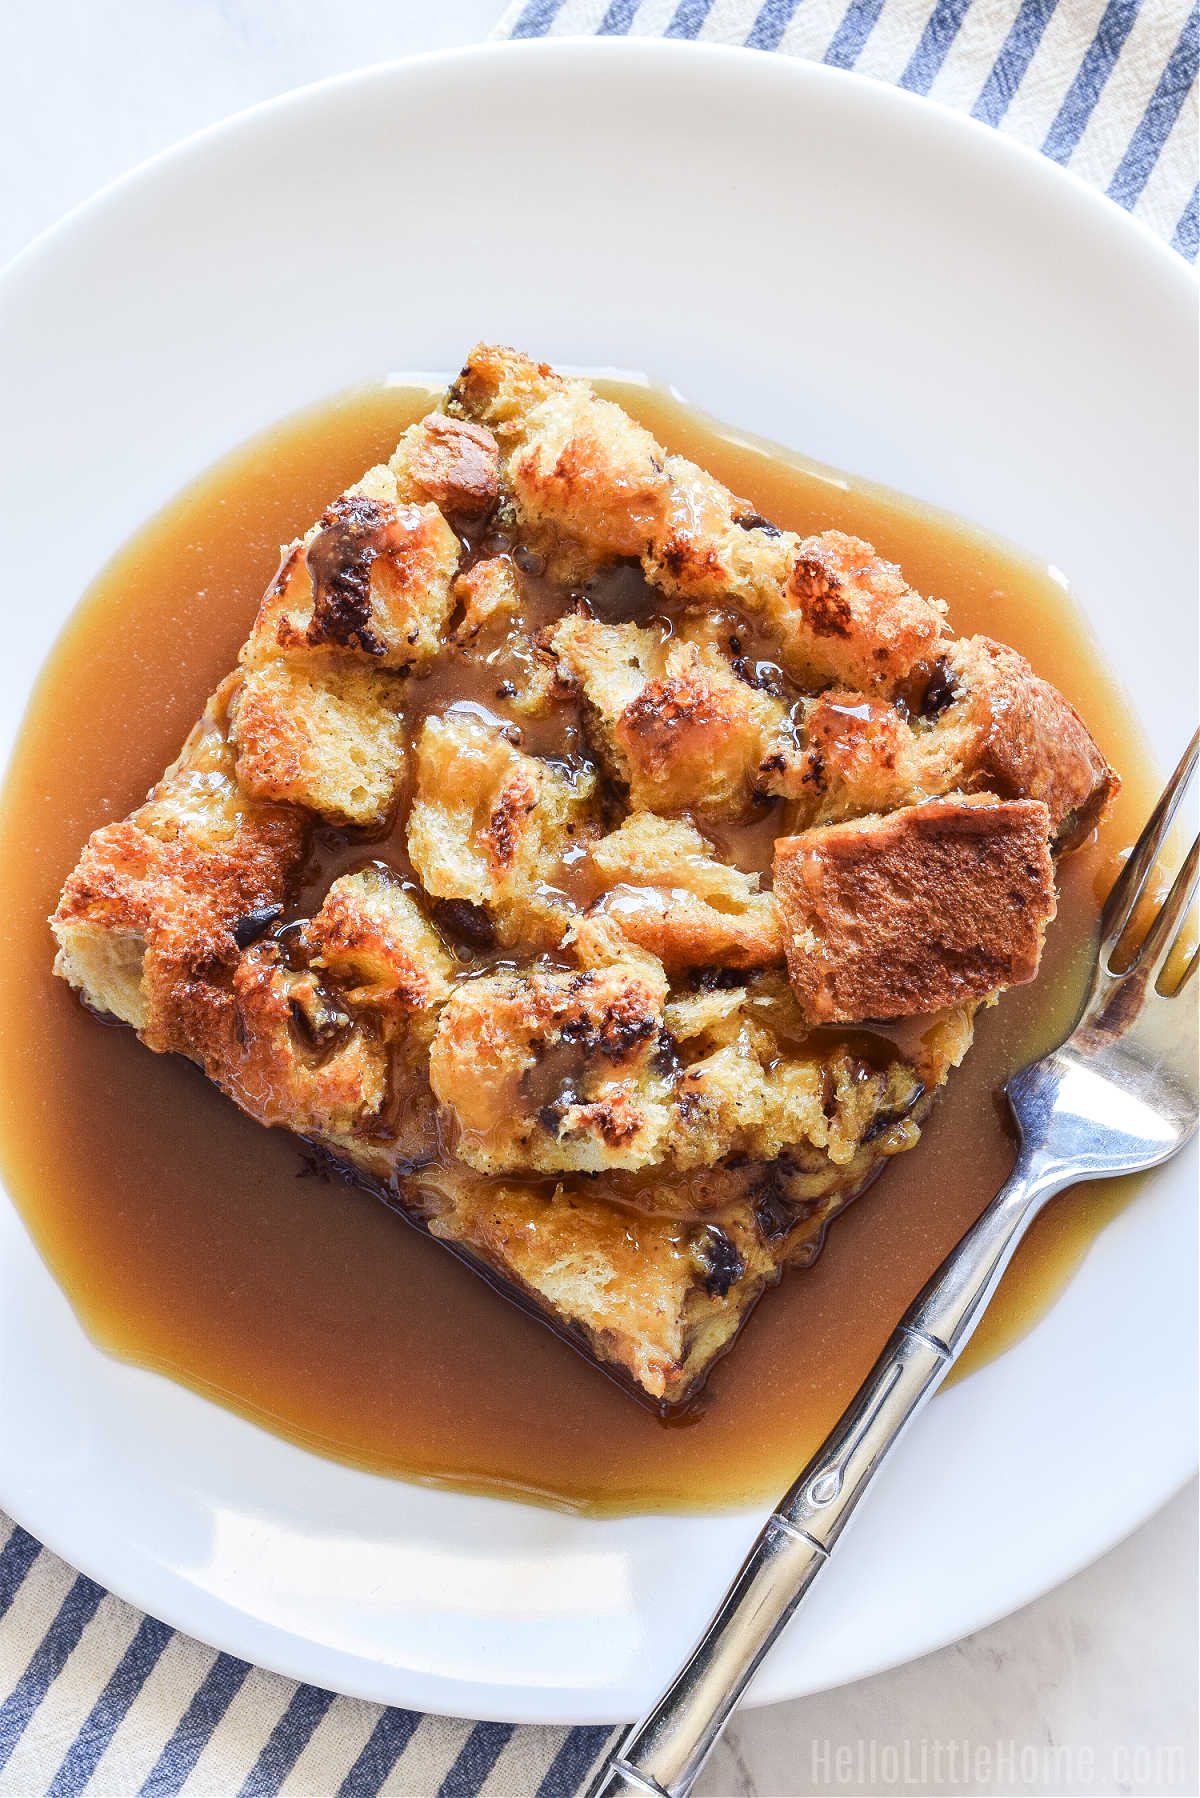 A slice of the Christmas bread pudding served on a white plate with a fork.